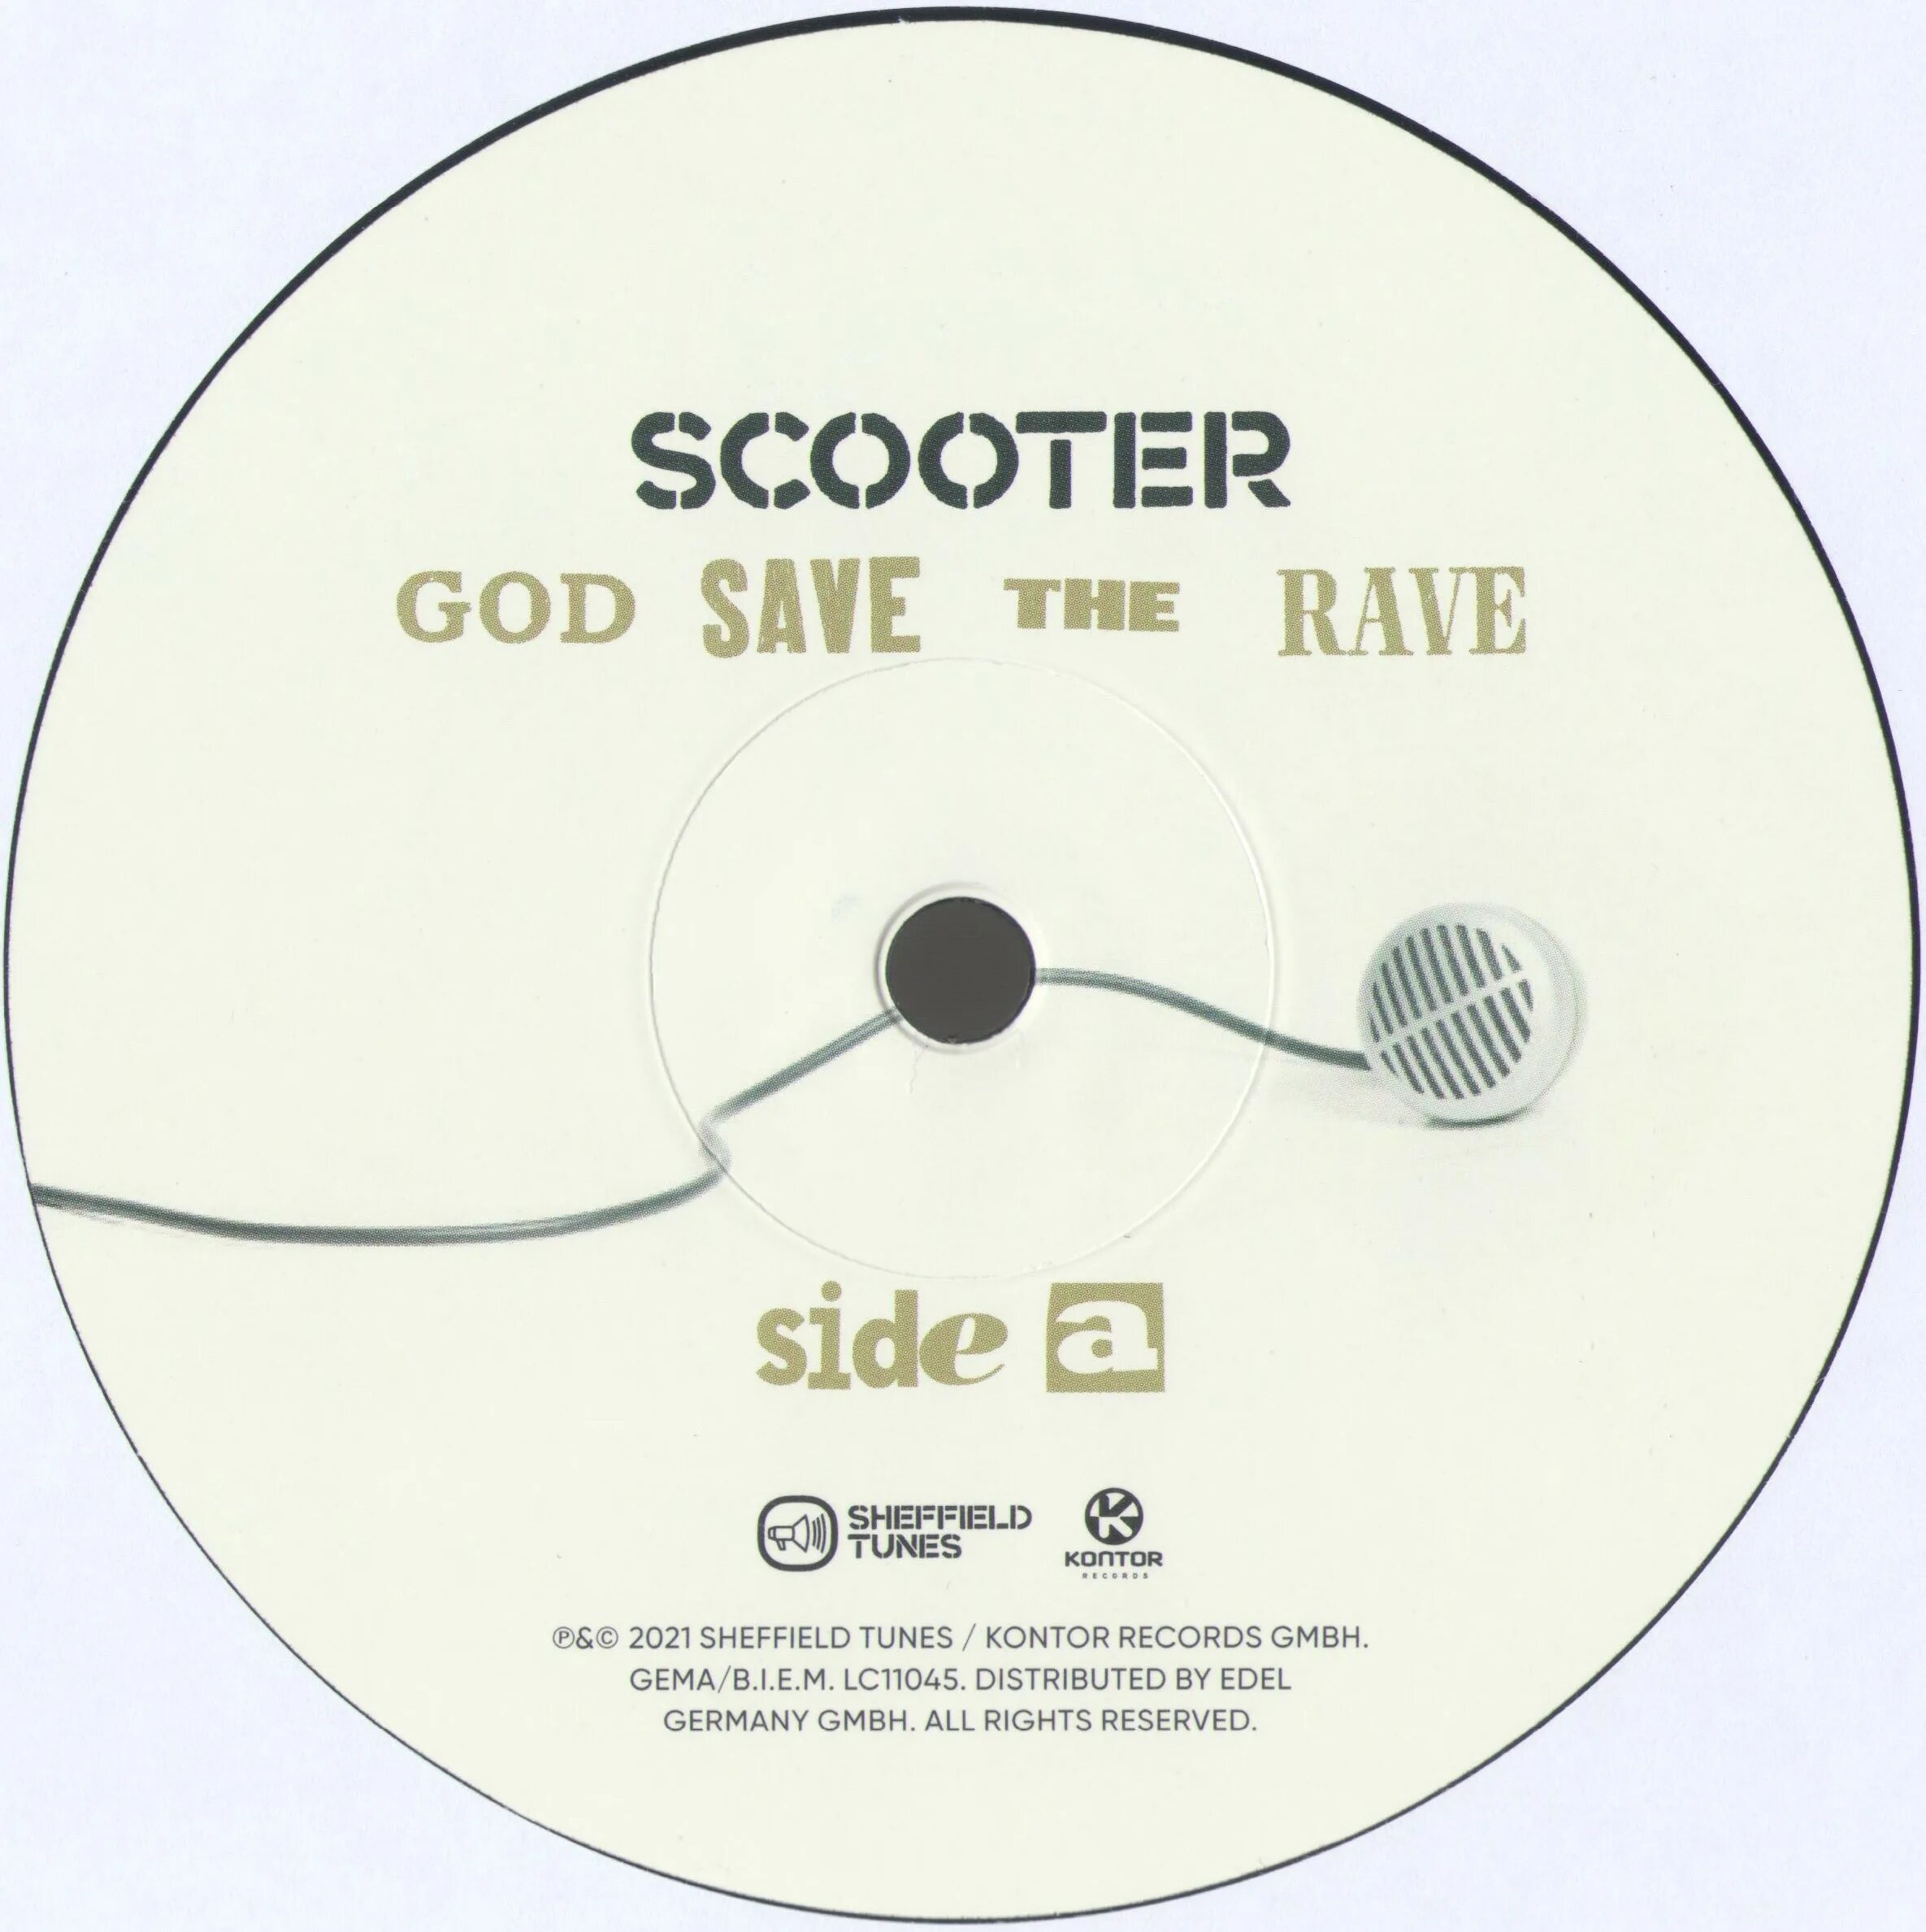 Scooter - God save the Rave (2021). God save the Rave. Scooter Harris Ford. Scooter Rave.